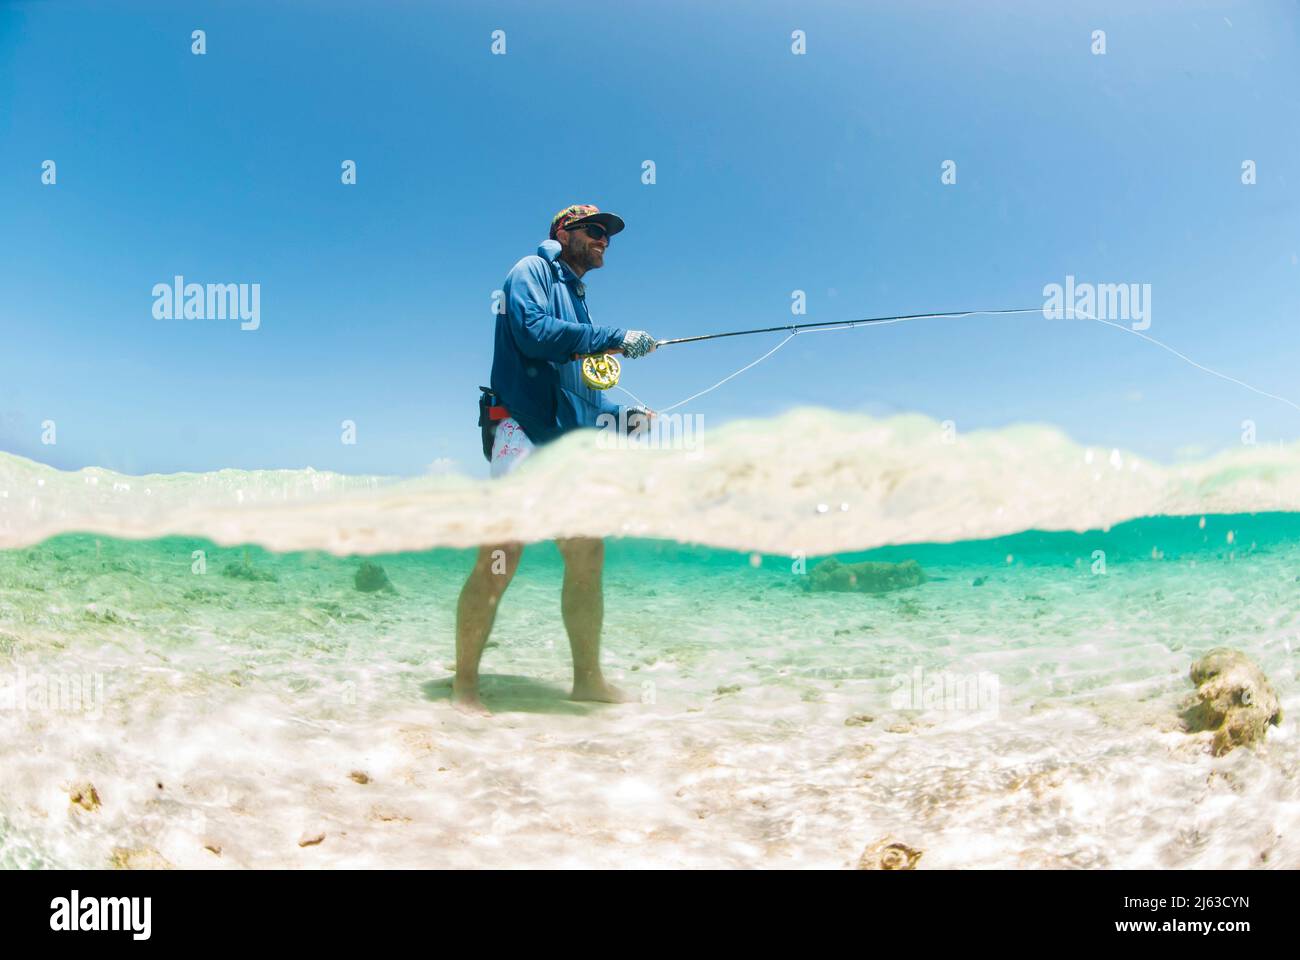 Half above and half below image of Fly fisherman casting Stock Photo